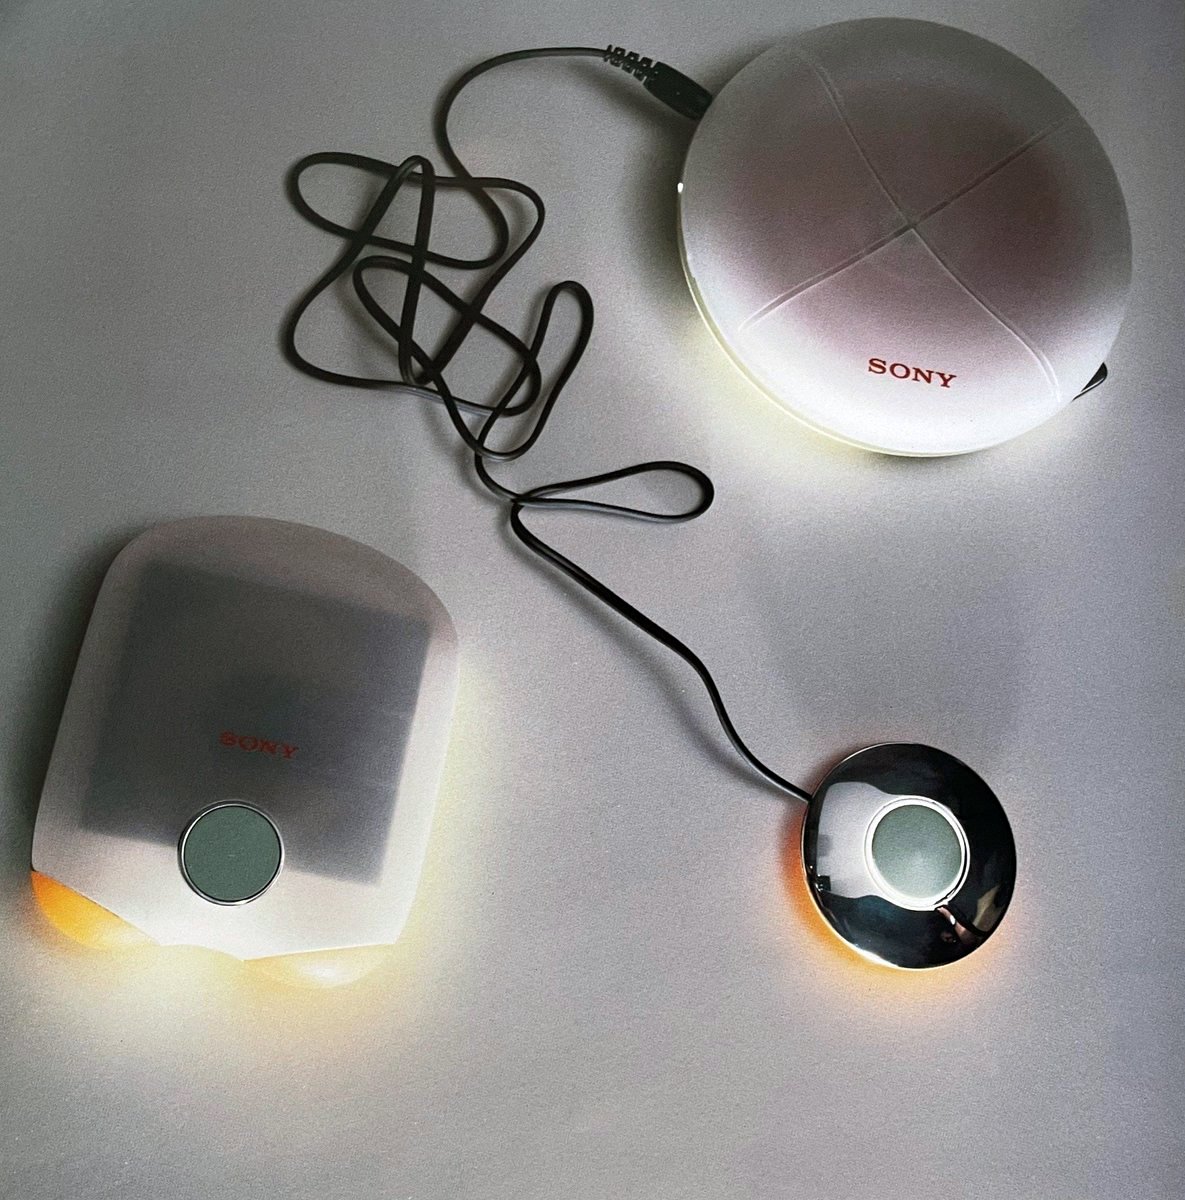 Concepts for a MiniDisc player and Discman, designed by Karim Rashid in 1998.